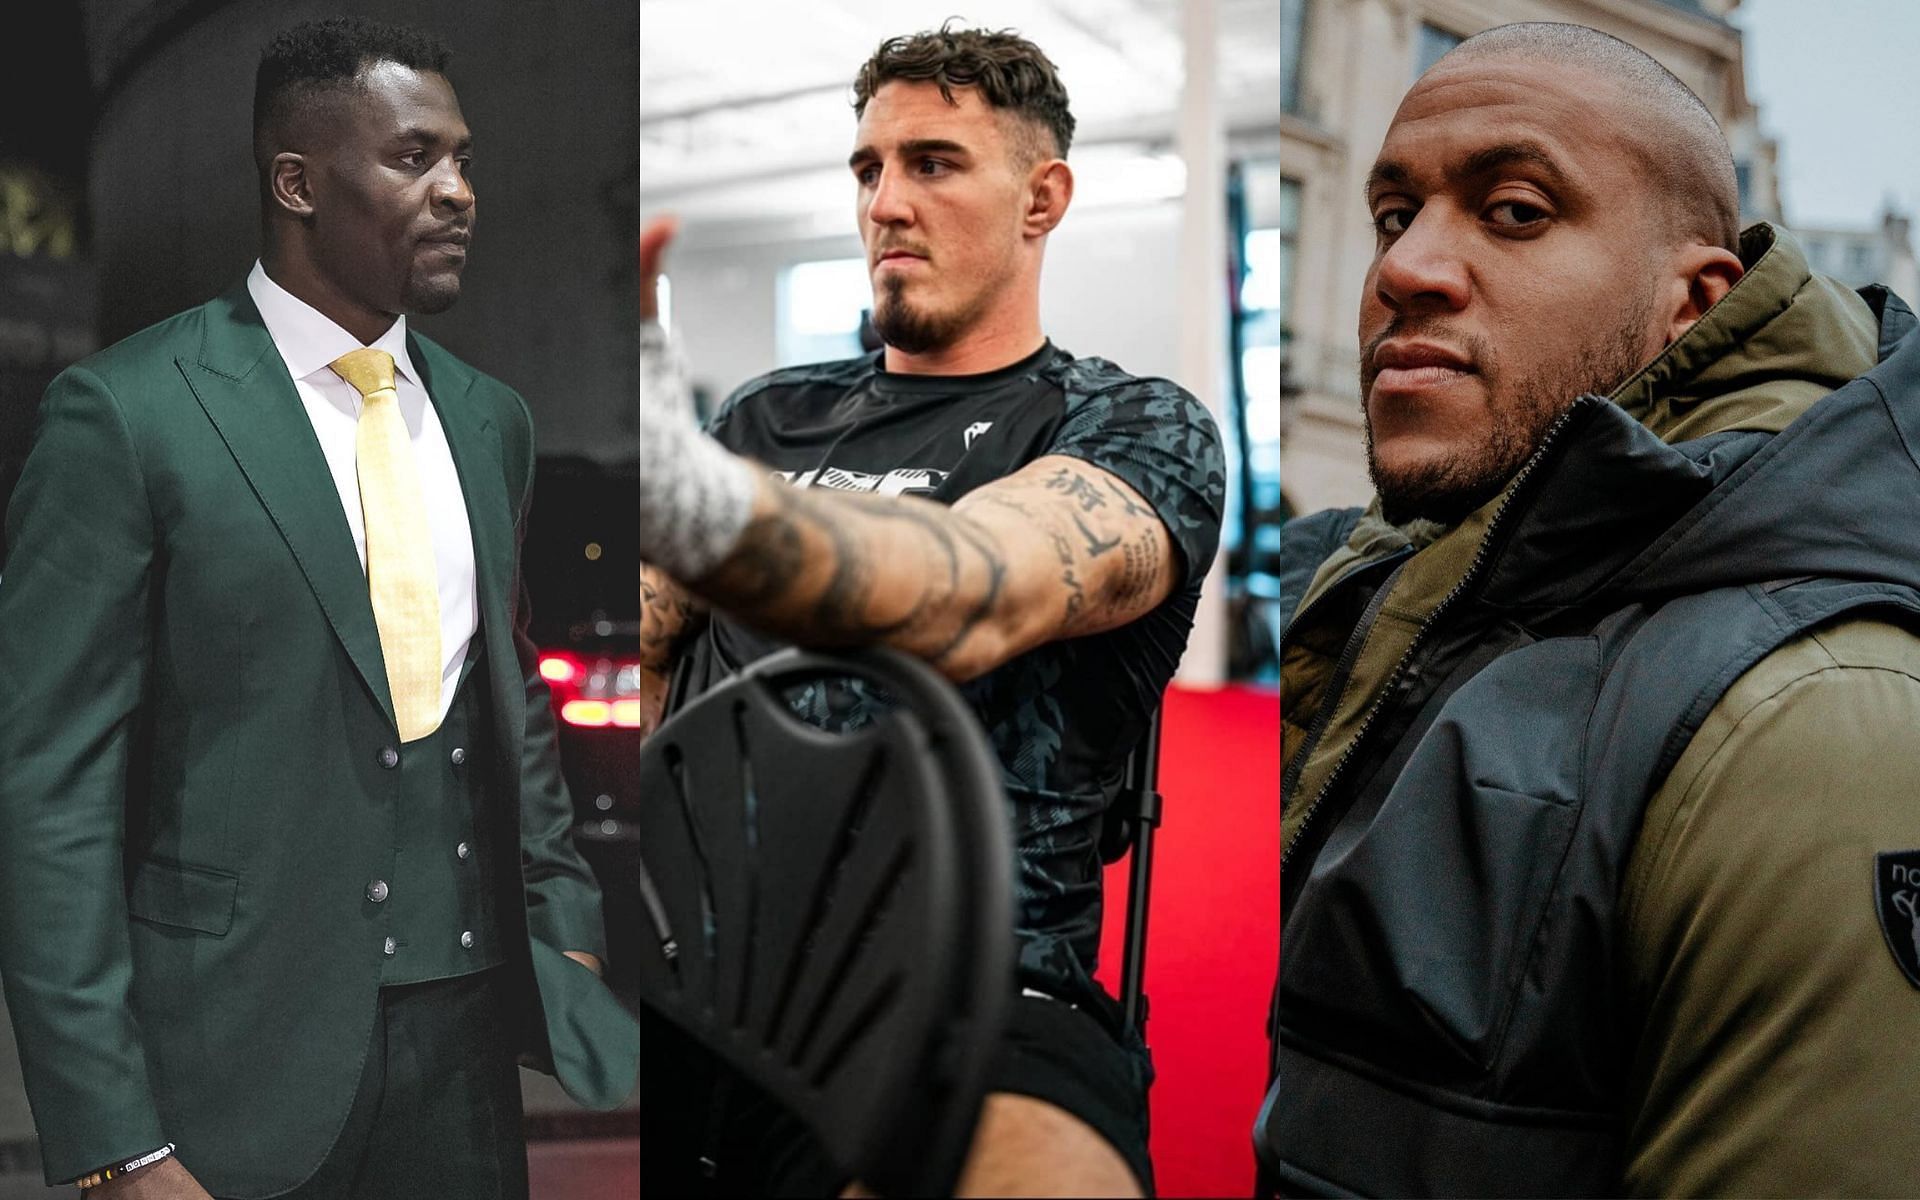 Ngannou, Aspinall, and Gane (left, center, and right; images courtesy of @francisngannou, @tomaspinallofficial, and @ciryl_gane Instagram)